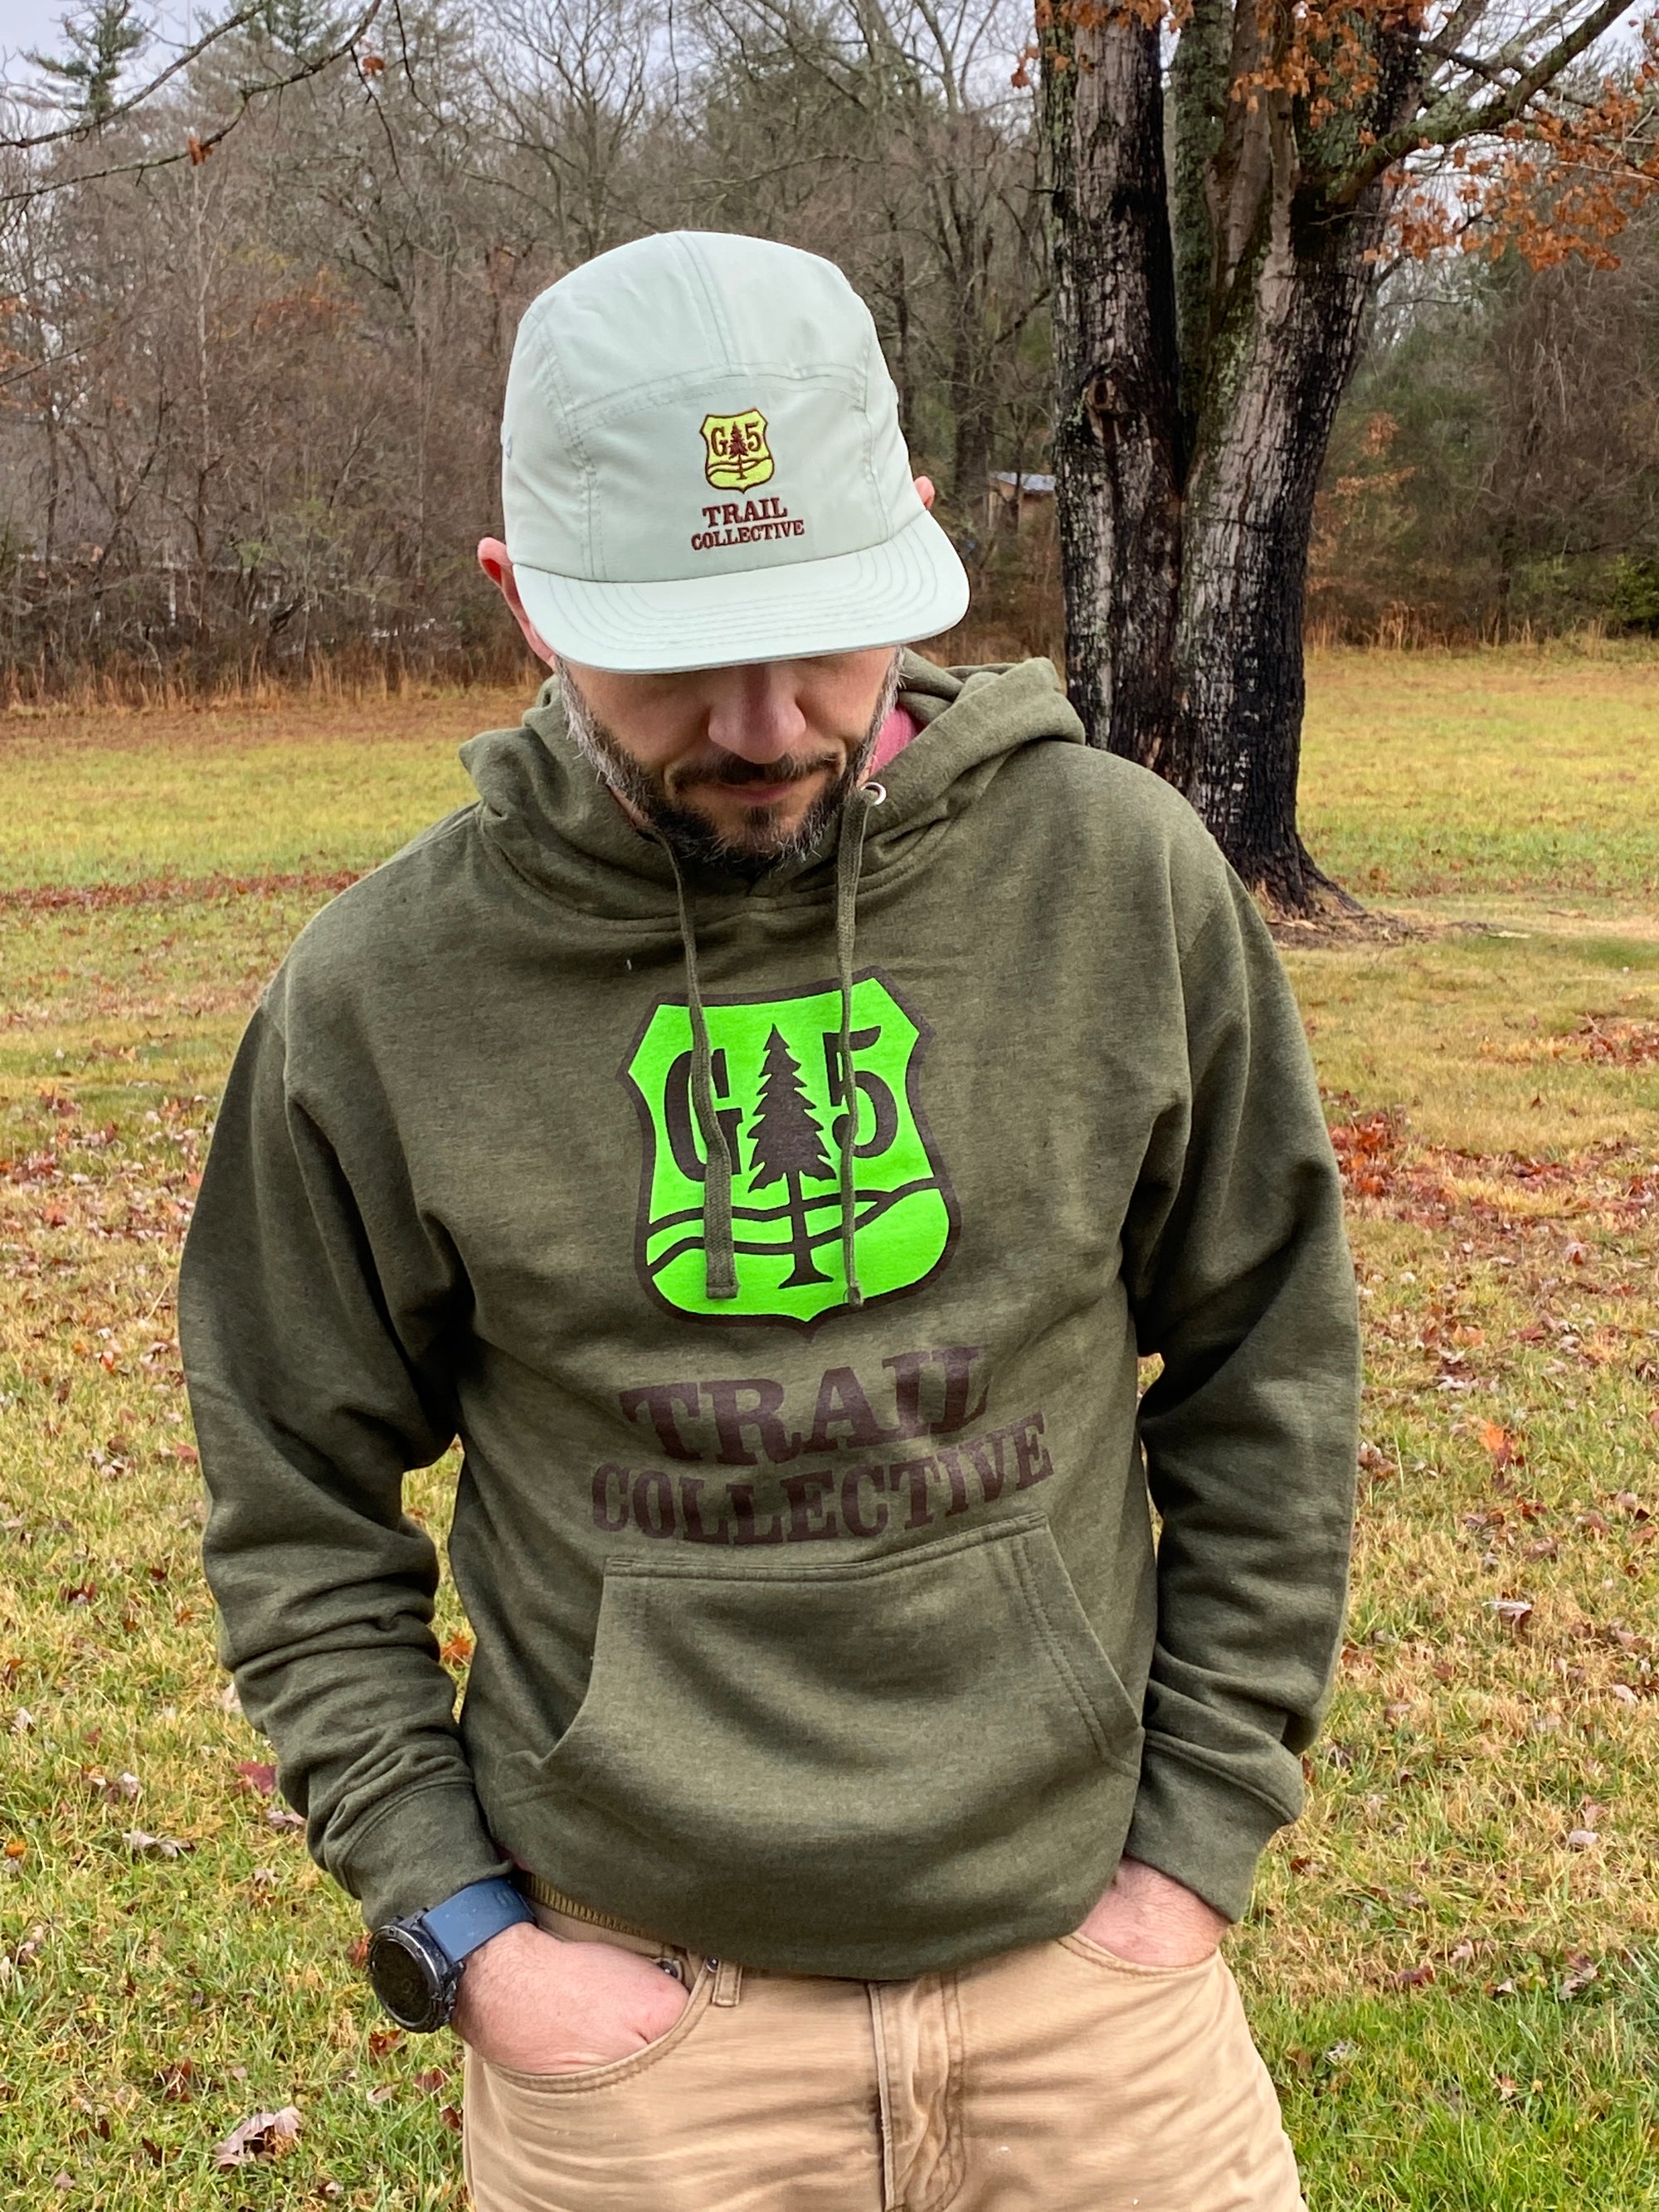 G5 Trail Collective Hat